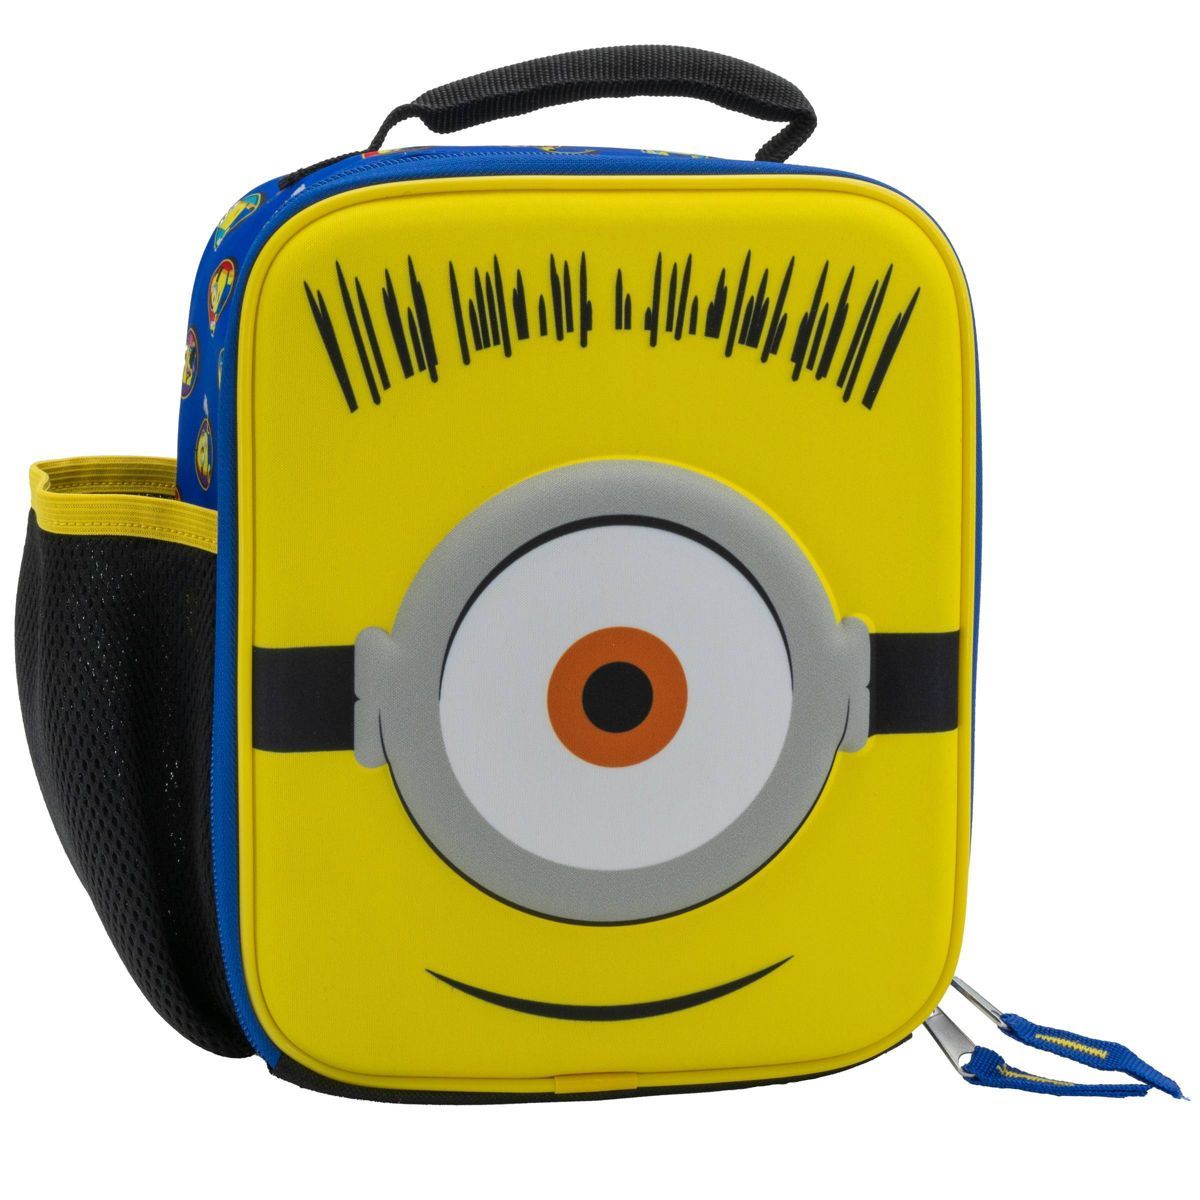 Minions Kids' Lunch Bag | Target